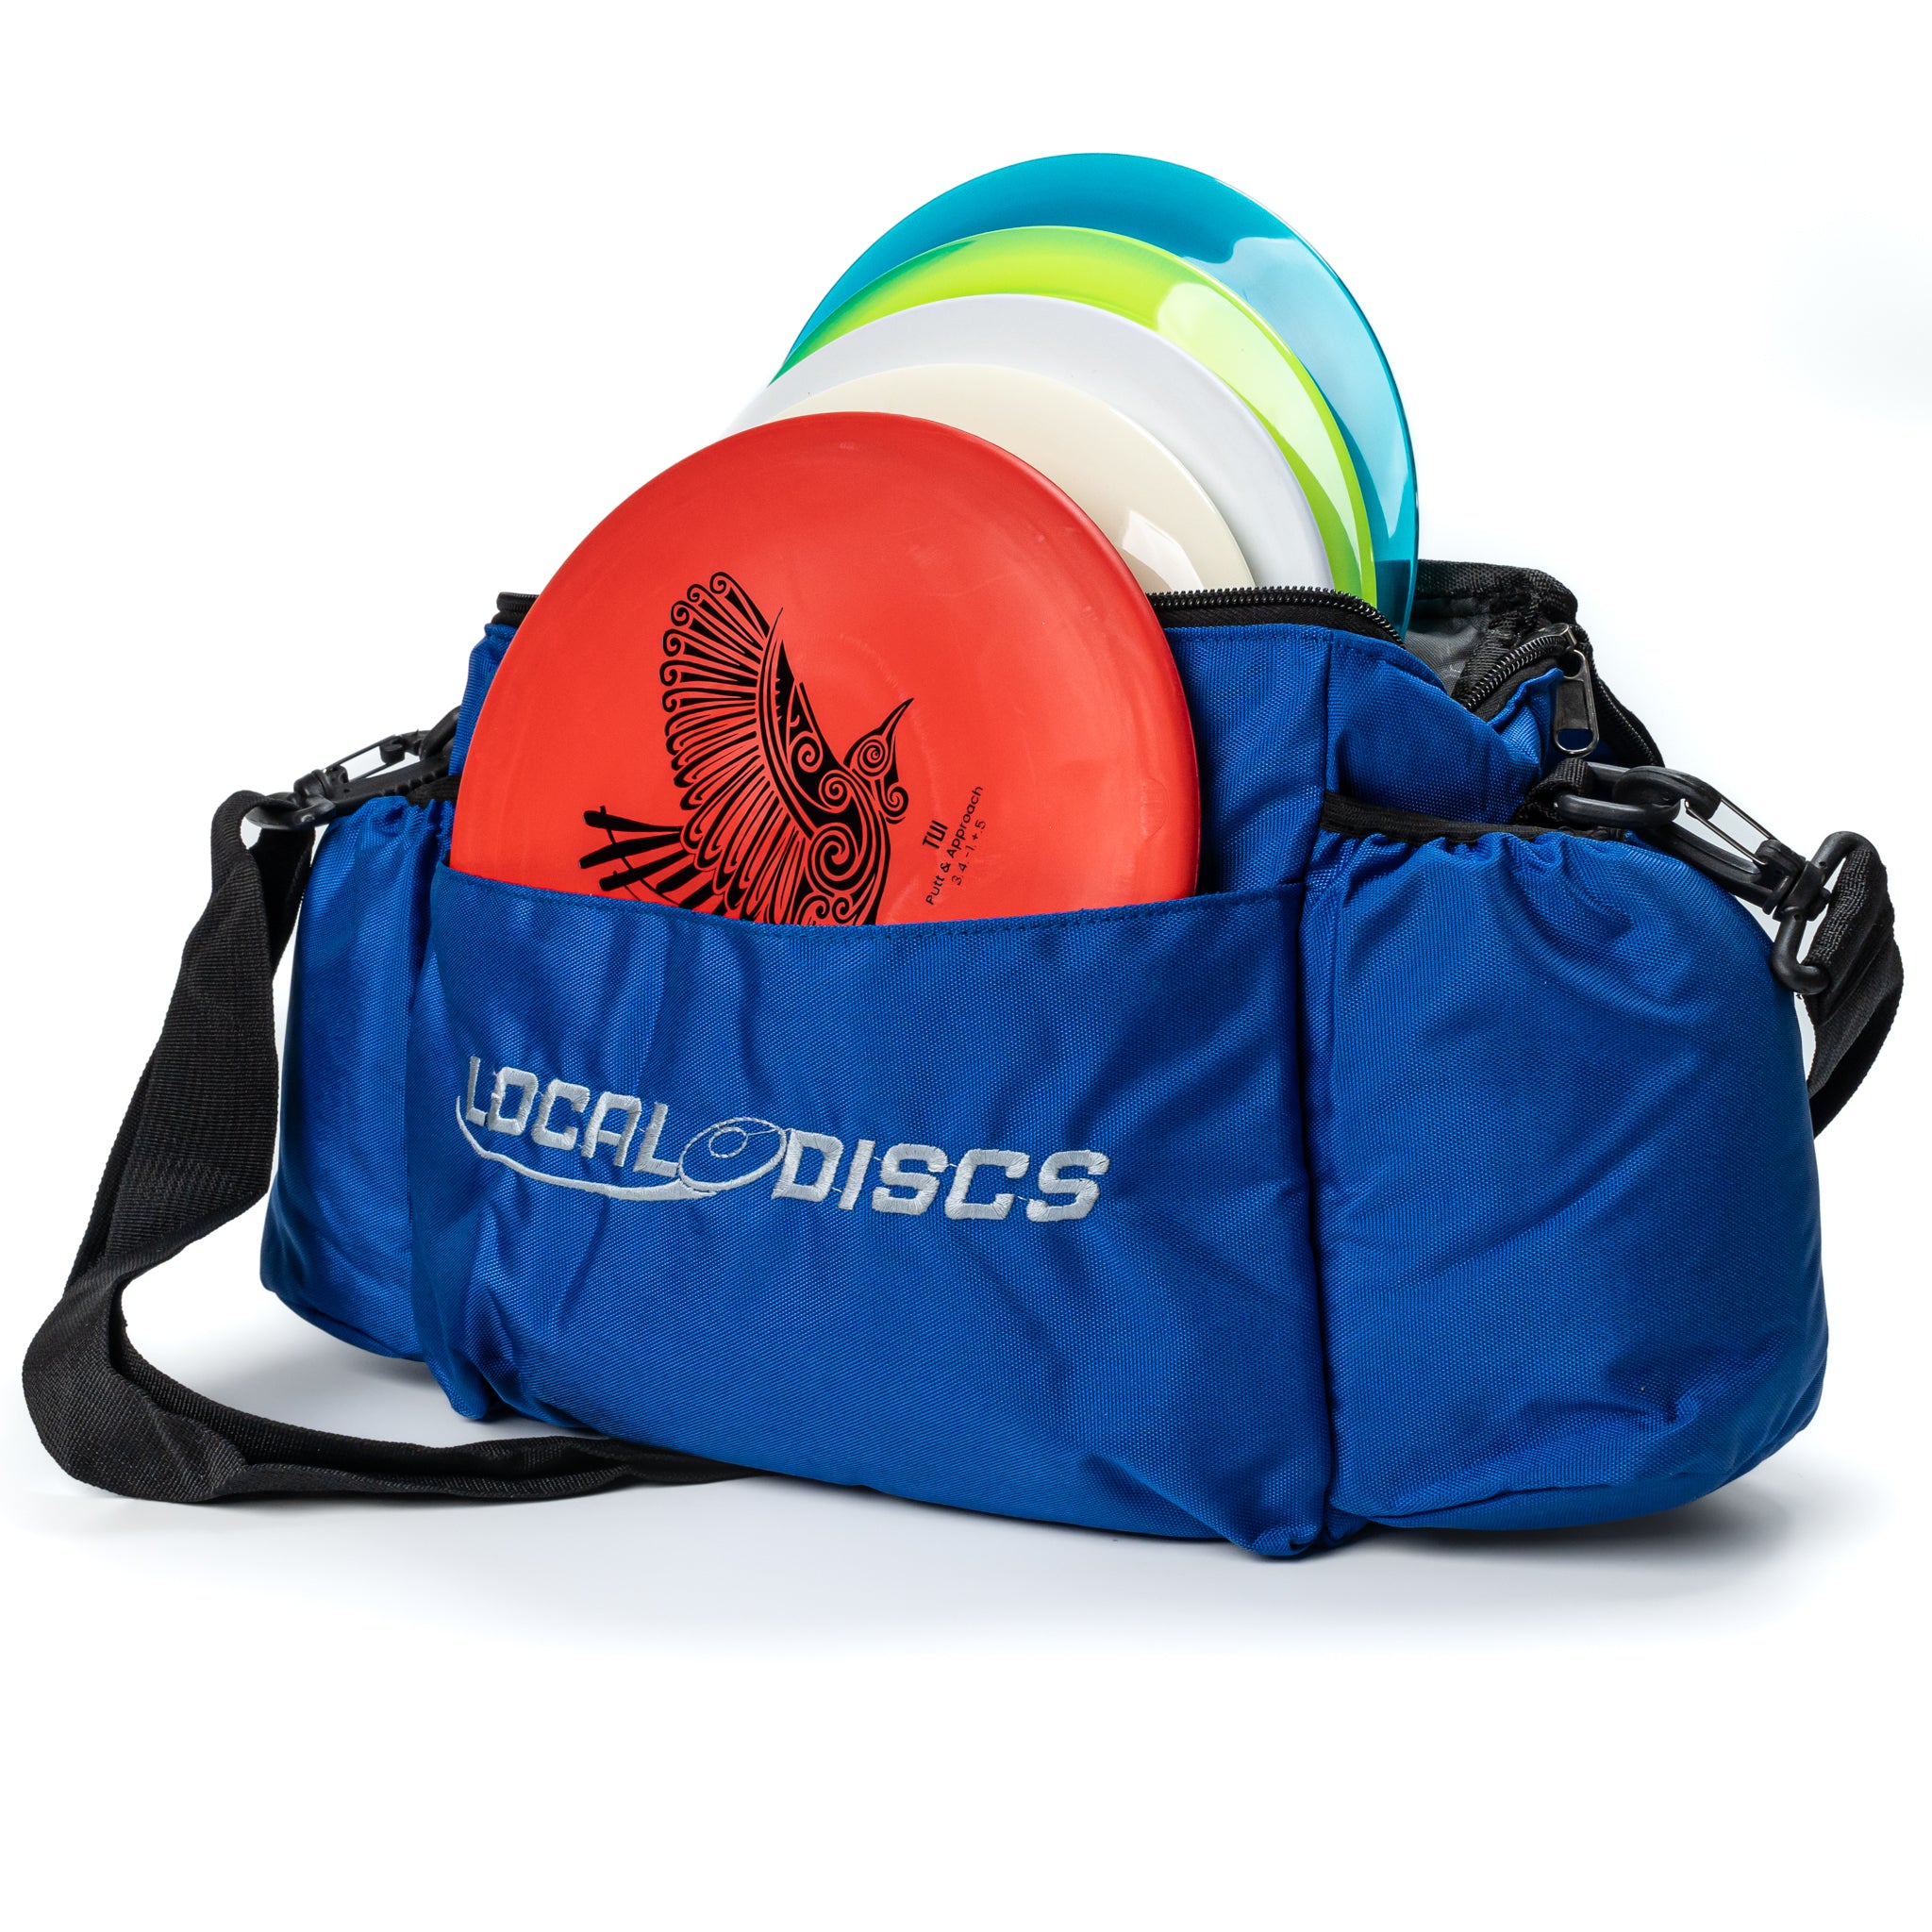 Local Discs Pro Starter Disc Golf Set with blue bag and Tui putter